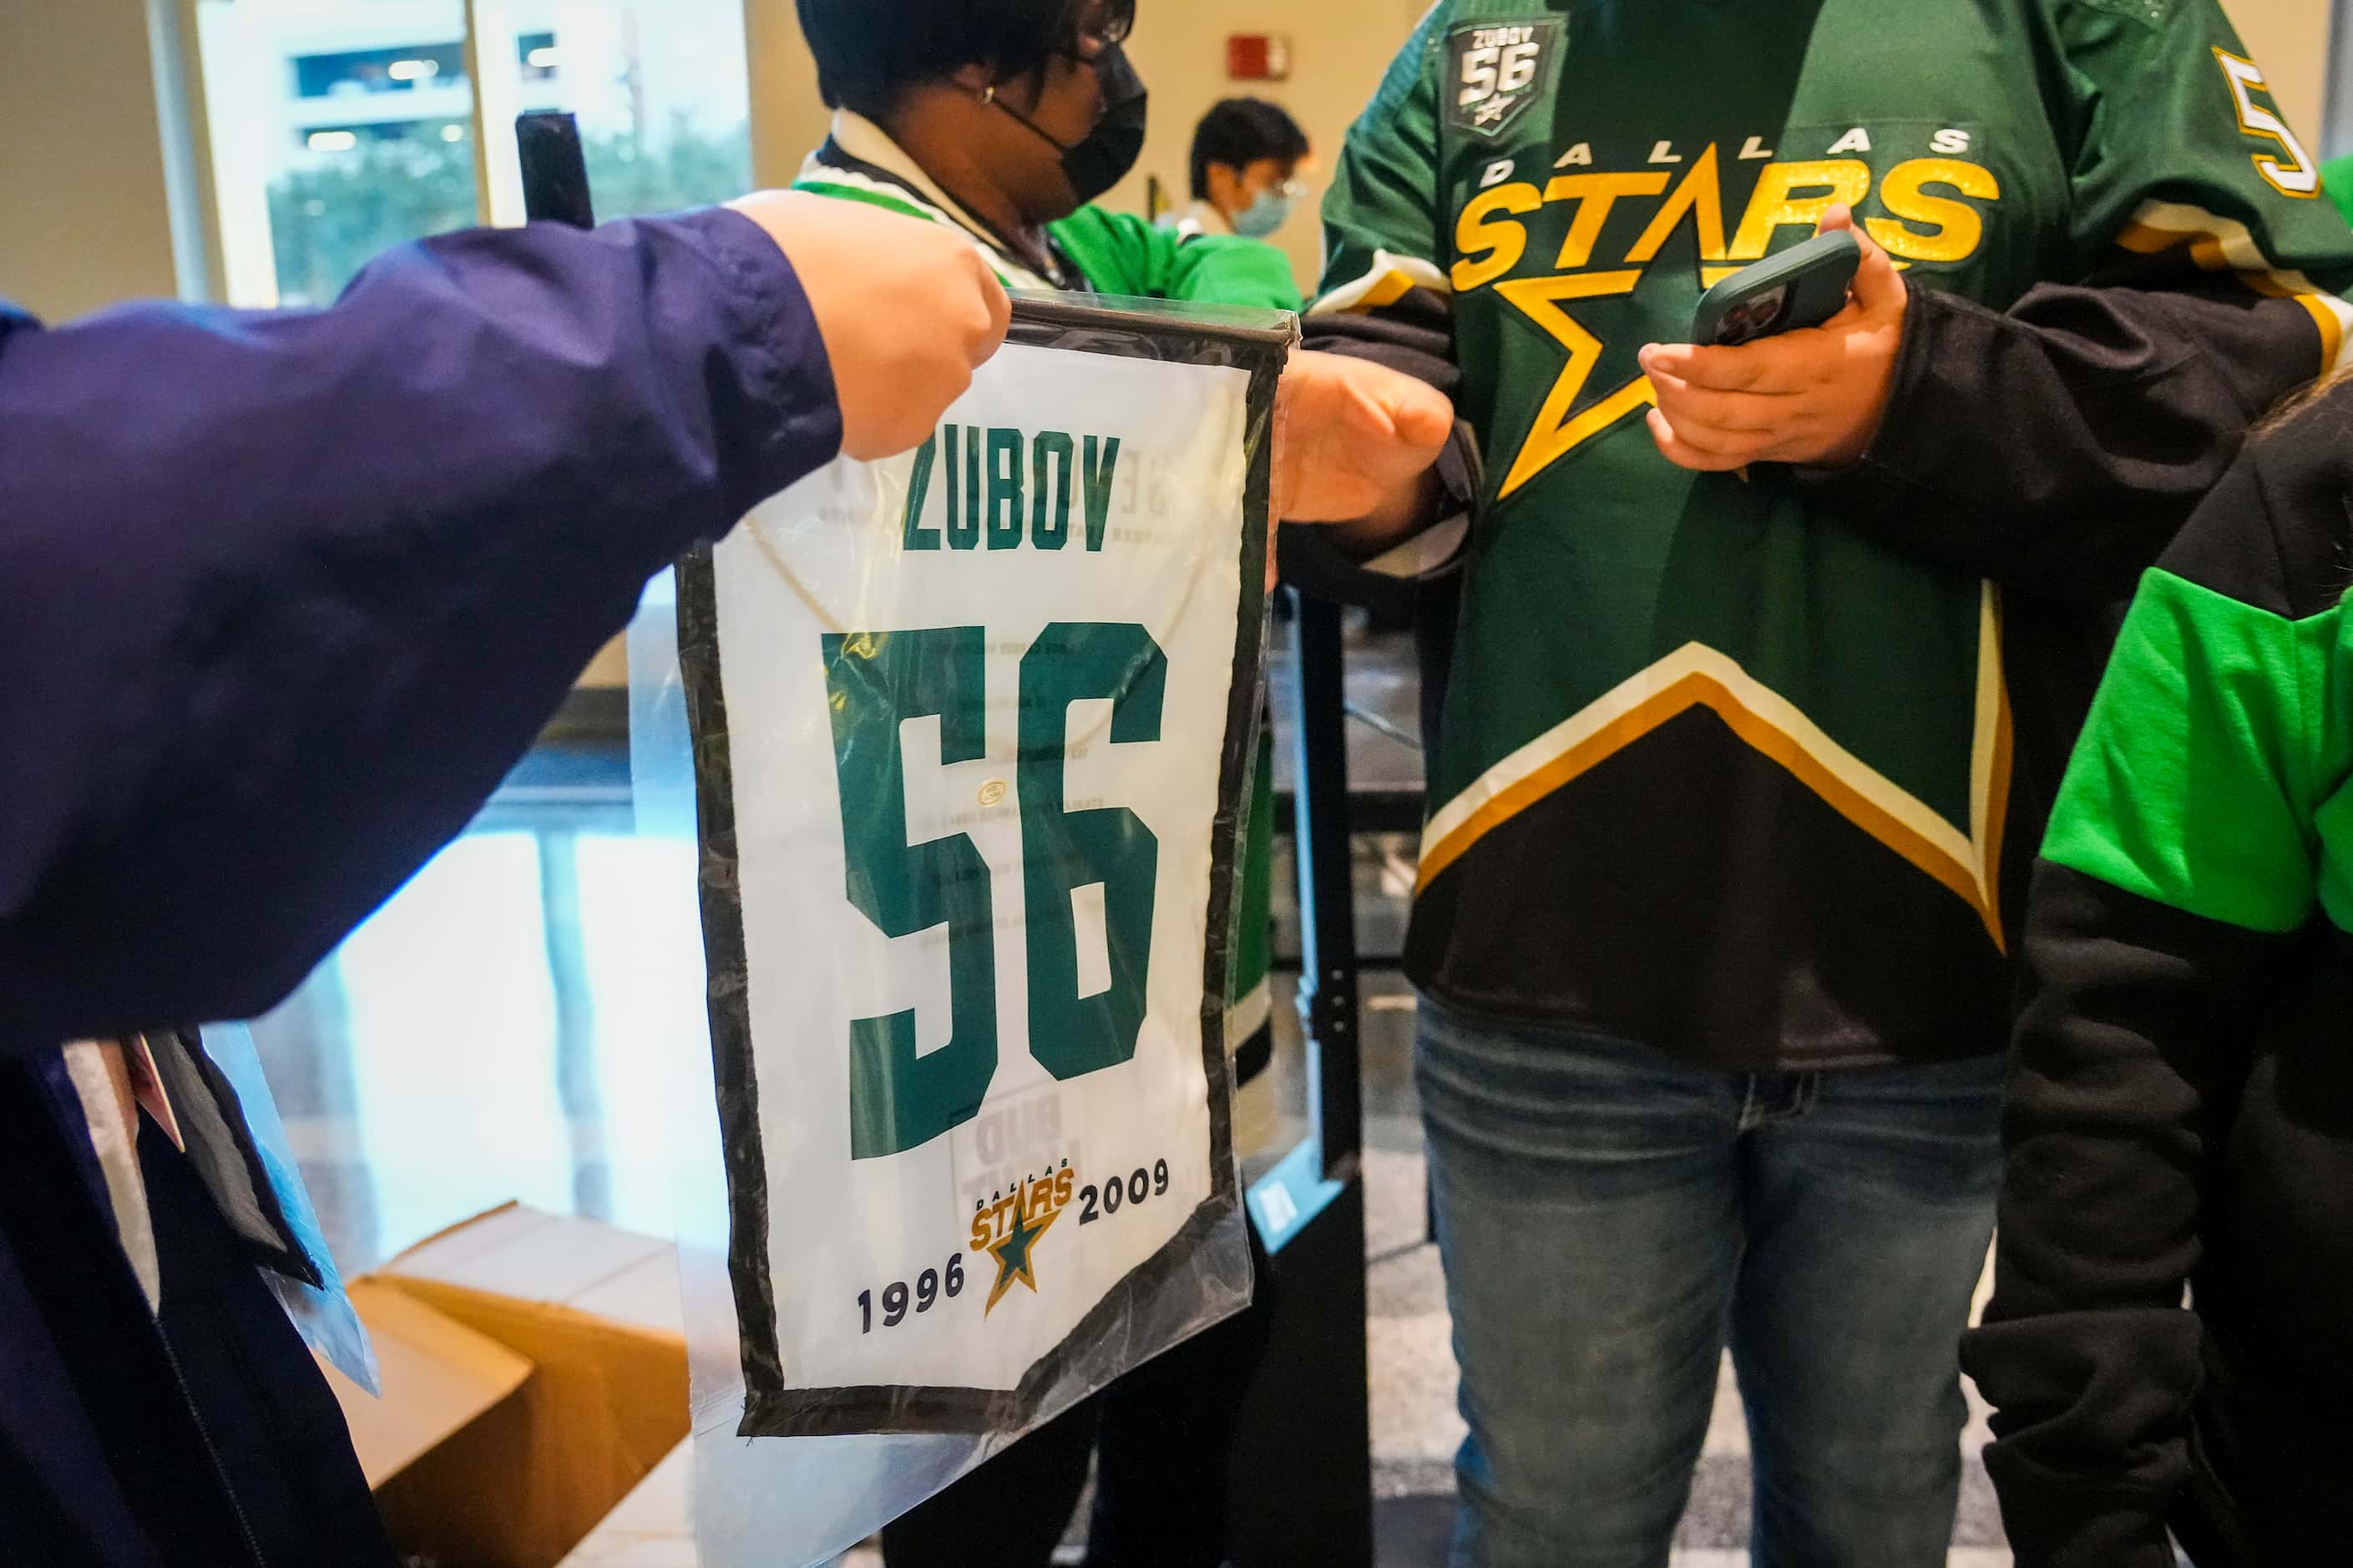 Banners honoring former Dallas Stars player Sergei Zubov given to fans as they arrive for...